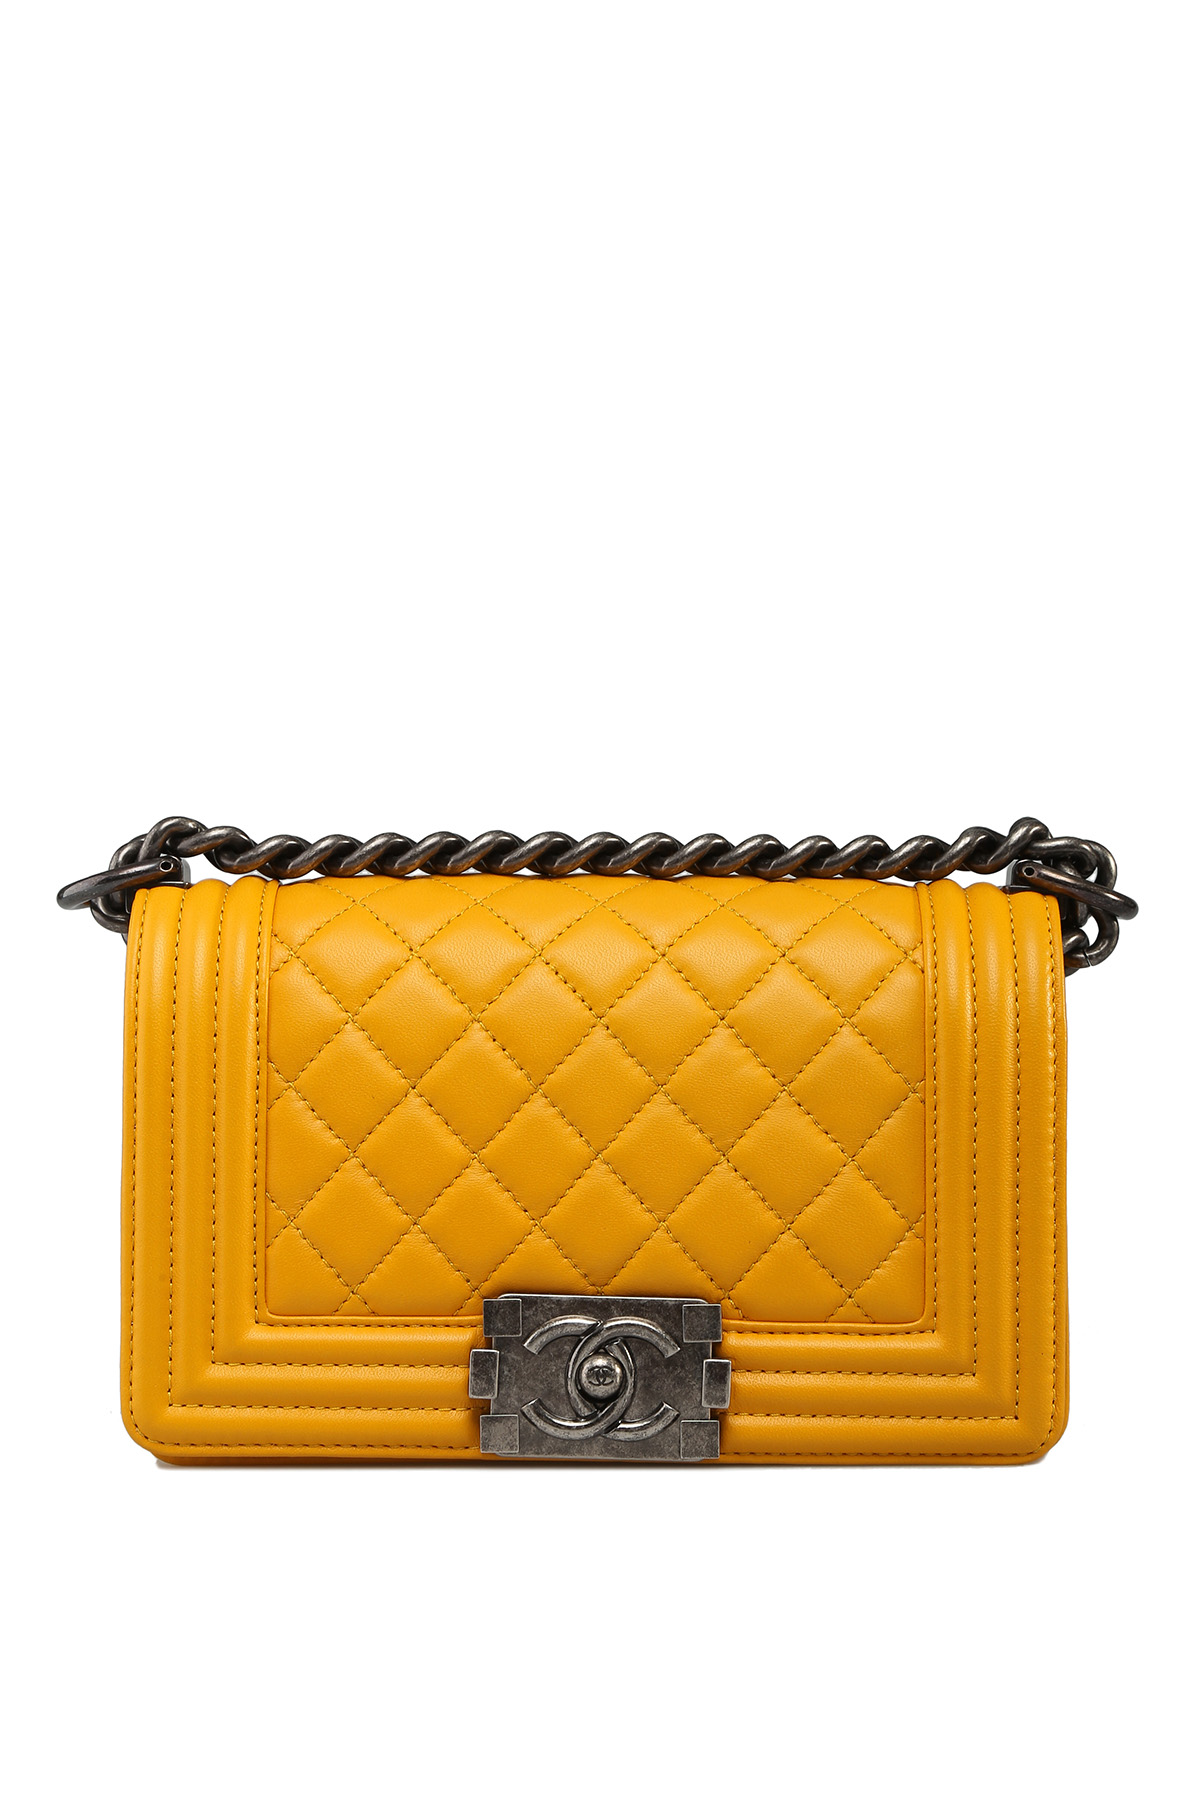 Chanel Small Boy Bag in Yellow Lambskin with Ruthenium Hardware